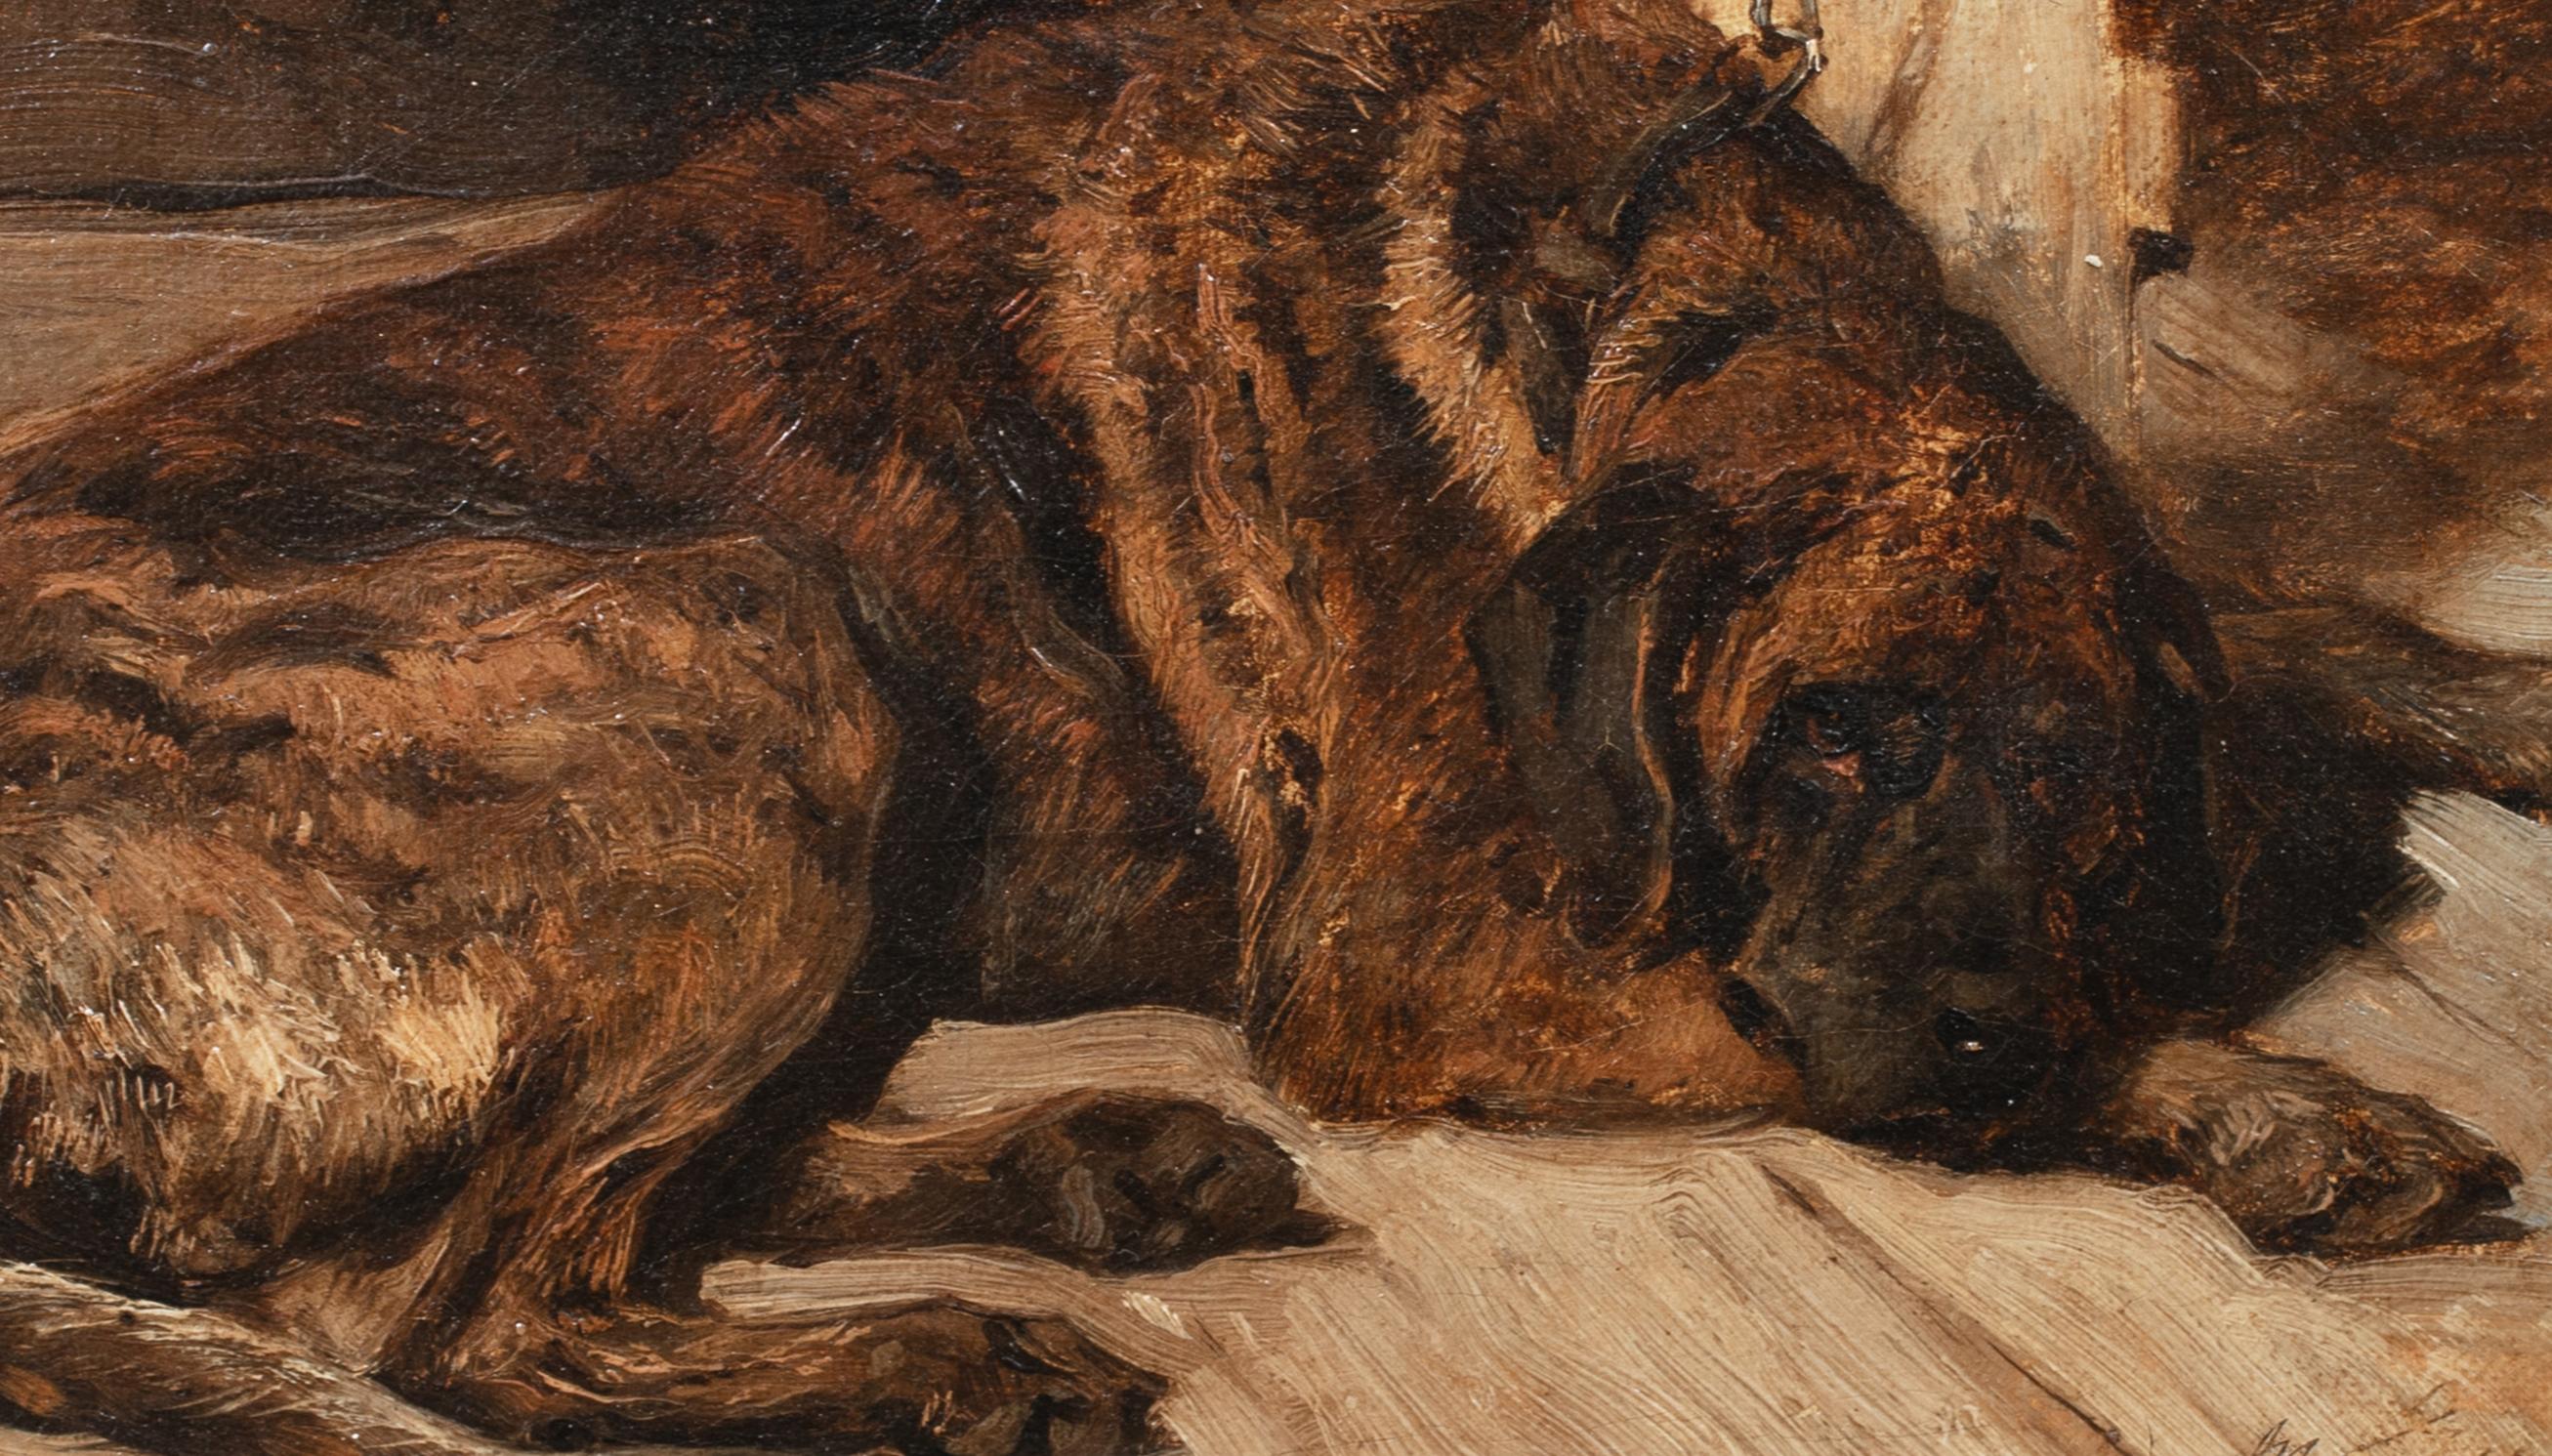  Portrait Of Brindle Coasted Mastiff Sleeping, 19th Century

by JOHN EMMS (1844-1912)

19th Century portrait of a sleeping Mastiff with a brindle coat, oil on canvas by John Emms, Excellent quality and condition example of the artists work signed